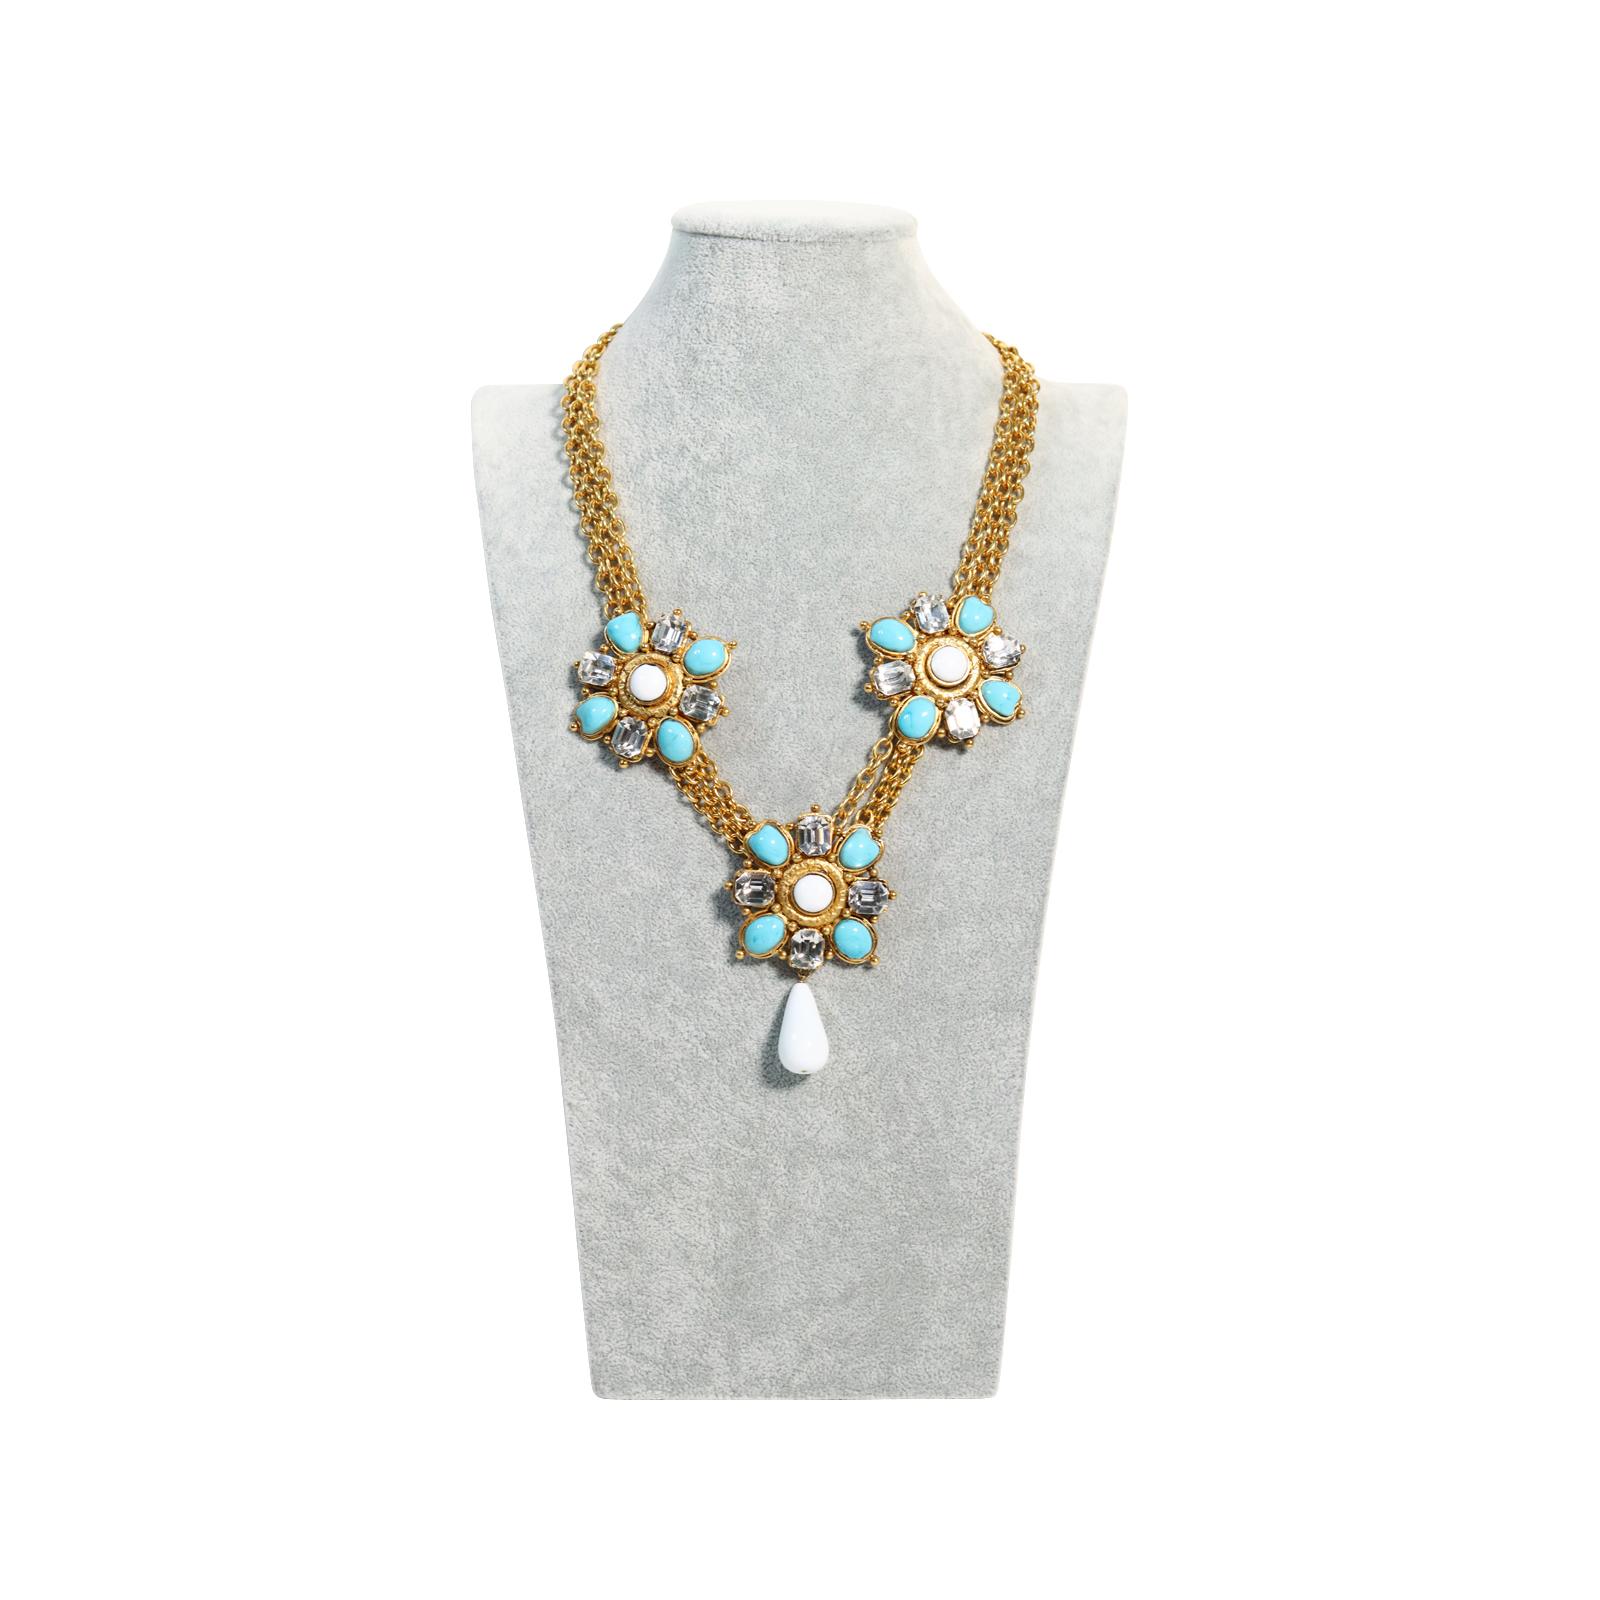 Vintage Maison Gripoix White, Crystal and Faux Turquoise on Gold Chain Necklace.  3 Different Emblems On Gold Chain with Dangling White Piece in the Middle.  22